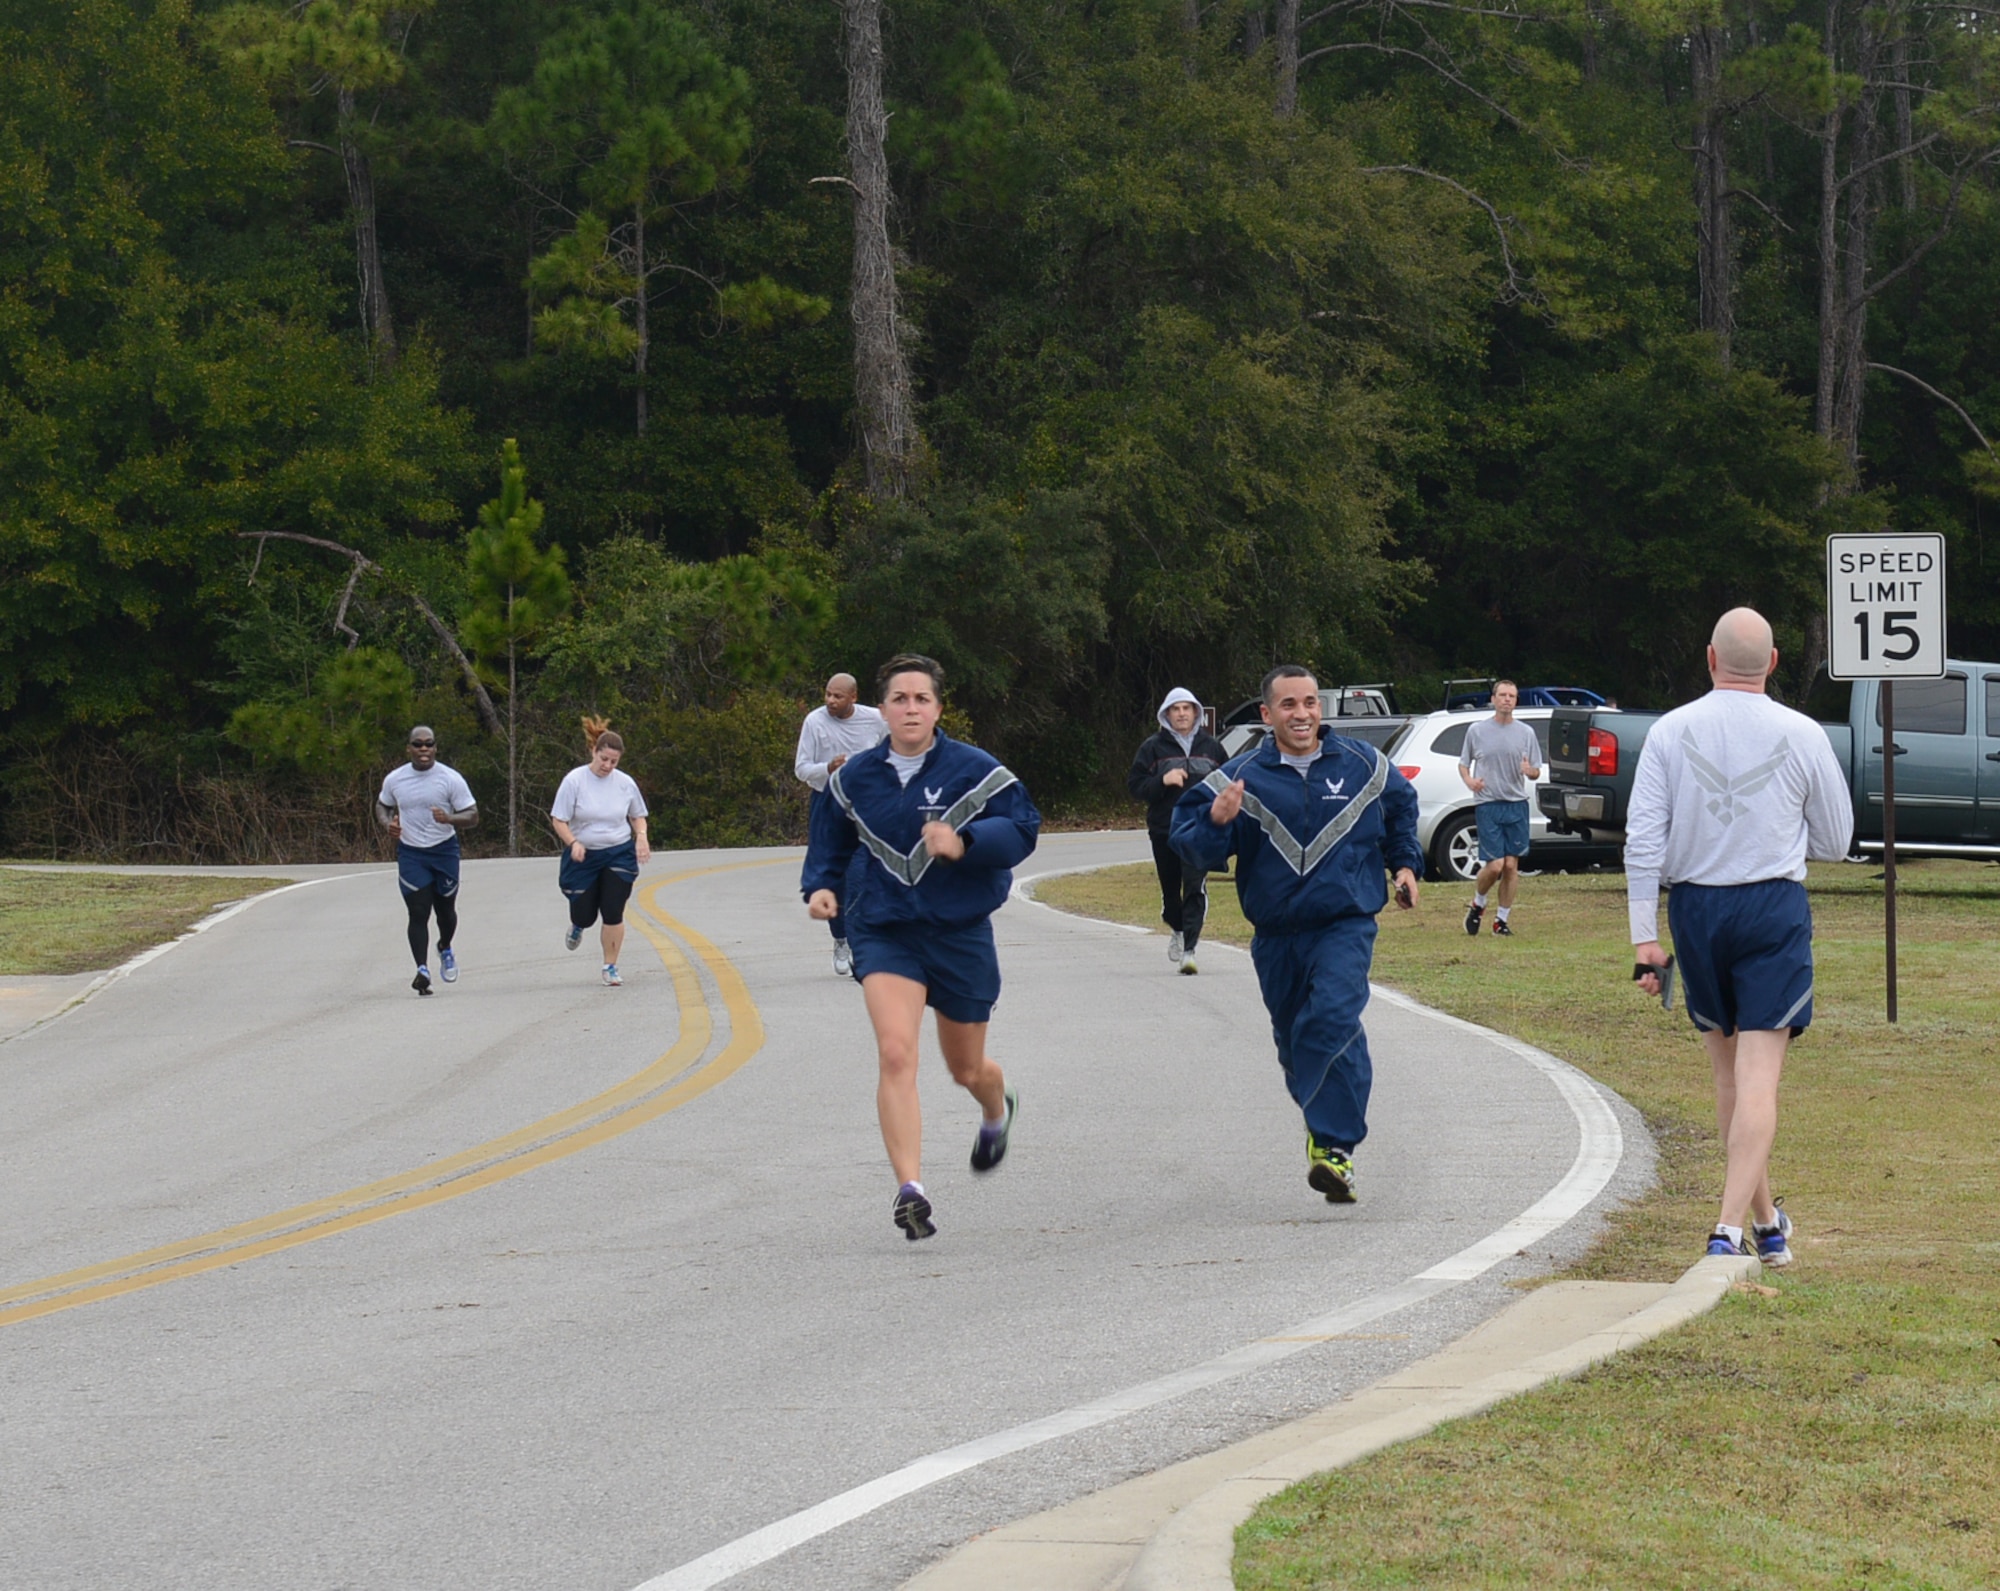 Air Commando sprint to the finish during the Command Run at Hurlburt Field, Fla., Feb. 3, 2017. The Air Force Special Operations Command staff meets monthly to run a 5K. (U.S. Air Force photo/Staff Sgt. Melanie Holochwost)